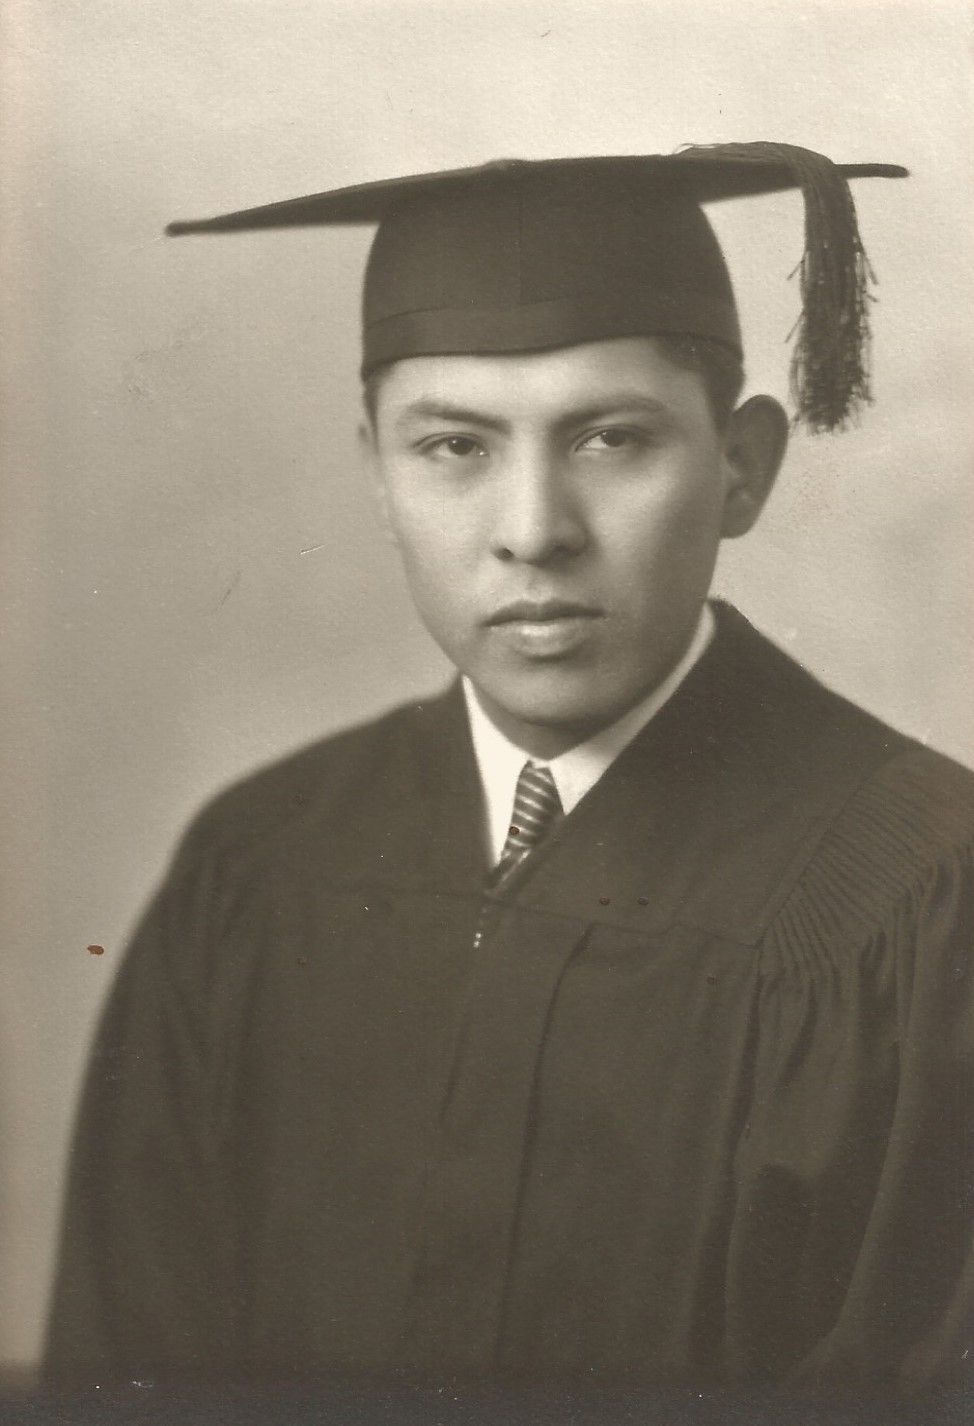 A young Medicine Crow in his graduation gown